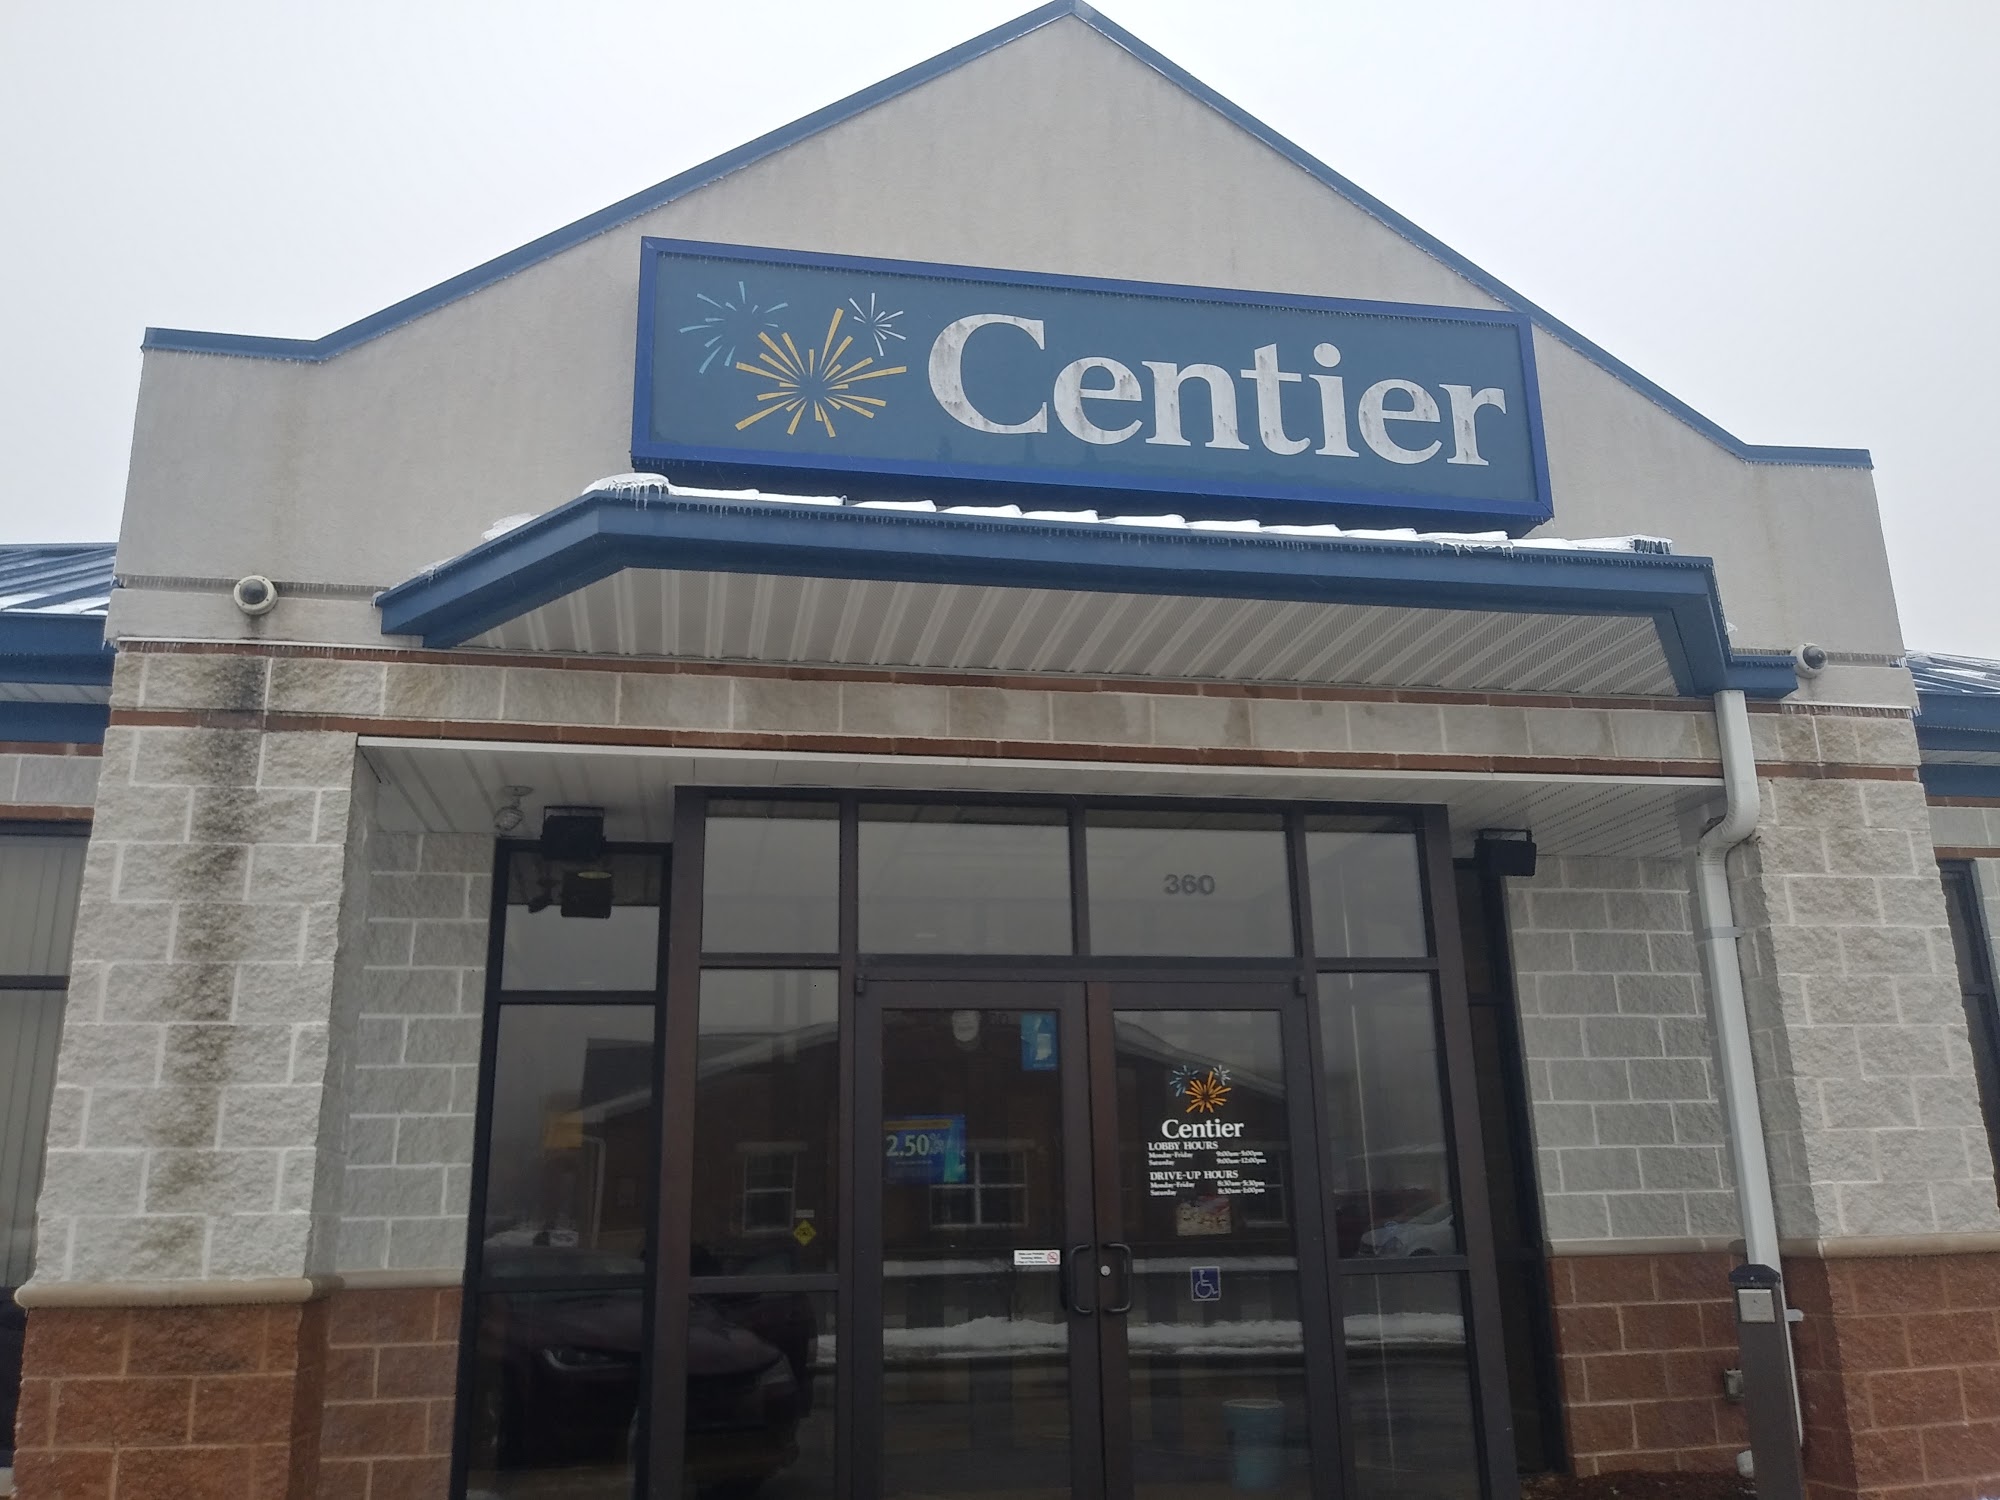 Centier Bank